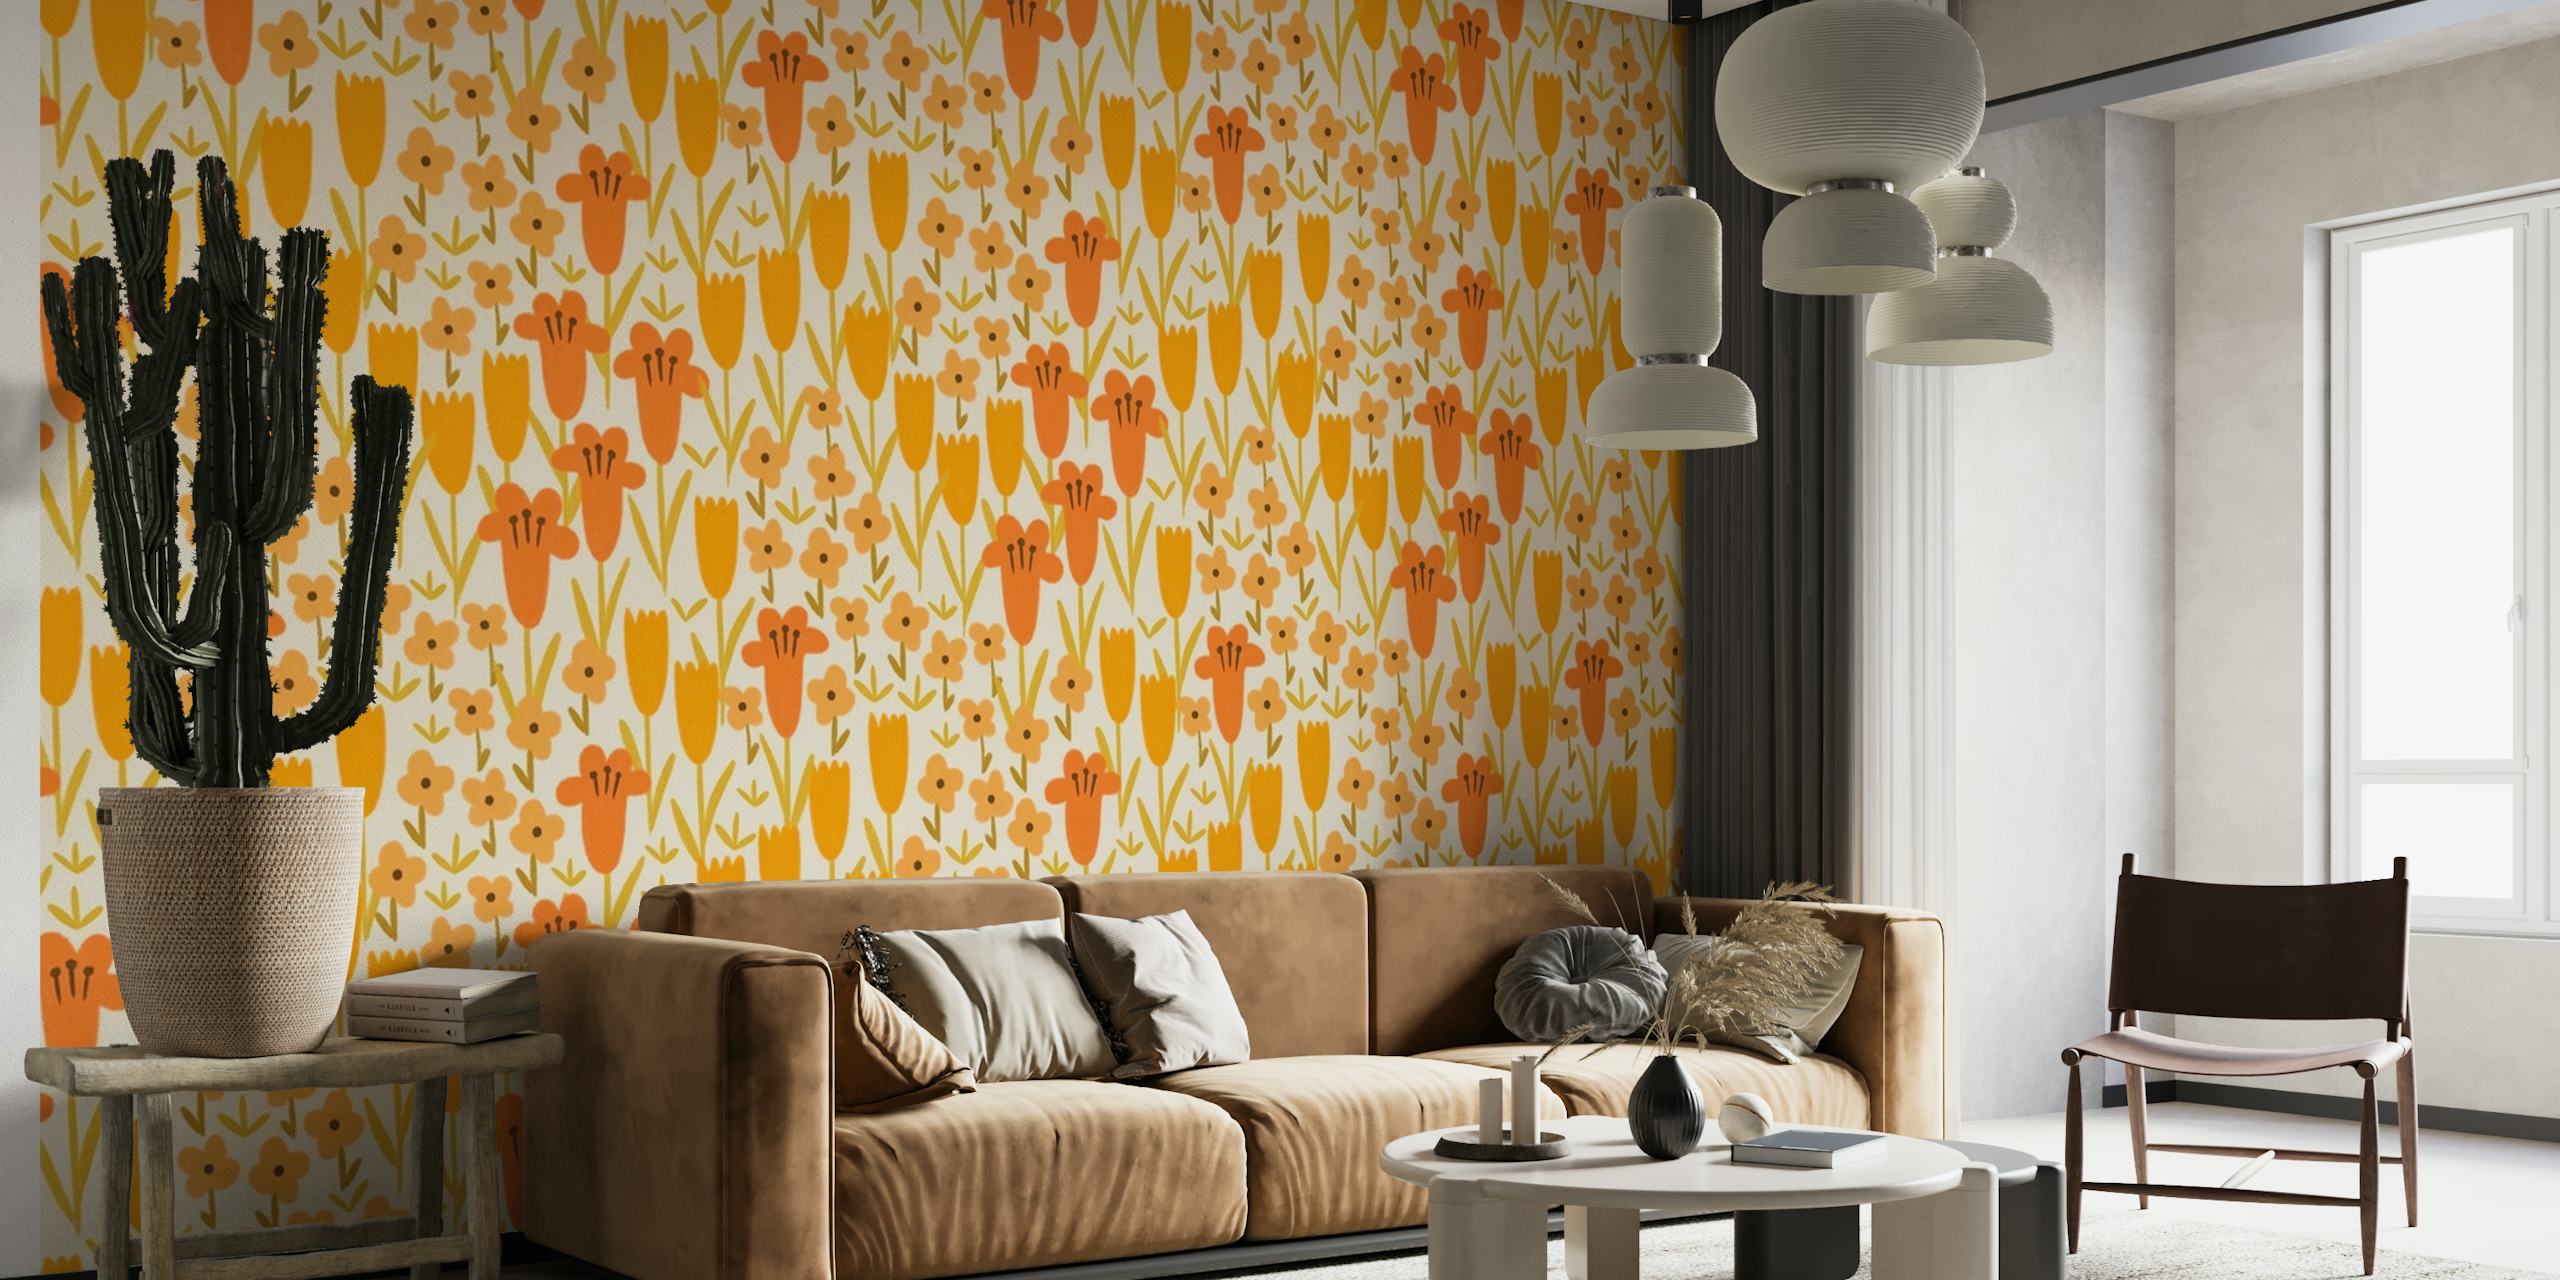 Orange floral pattern wall mural with green accents